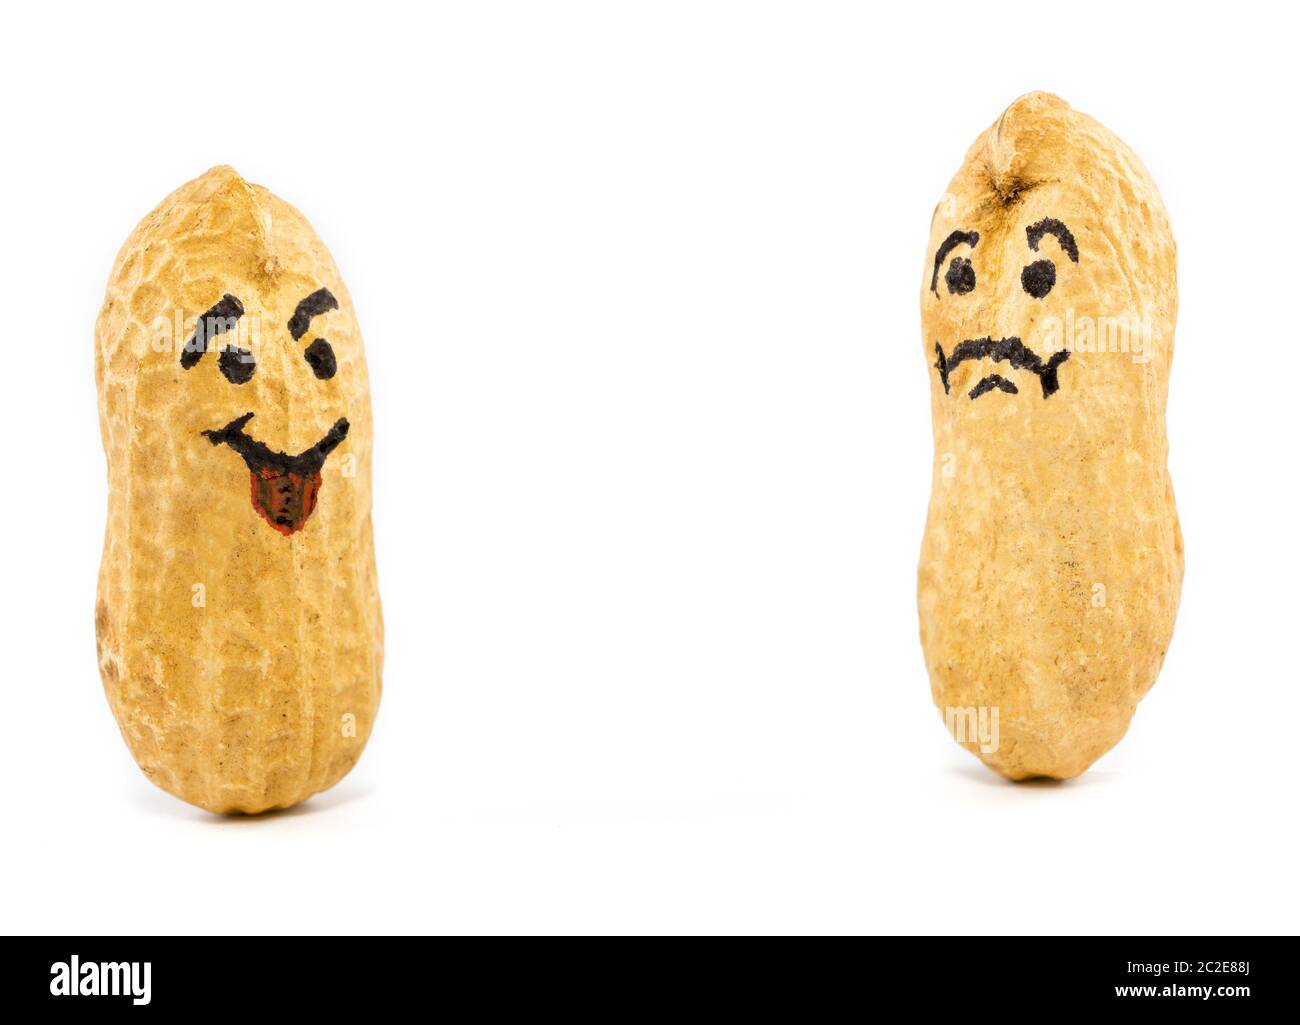 Smile and sad face drawn on dried peanuts on white background. Concept for good mood or bad mood Stock Photo